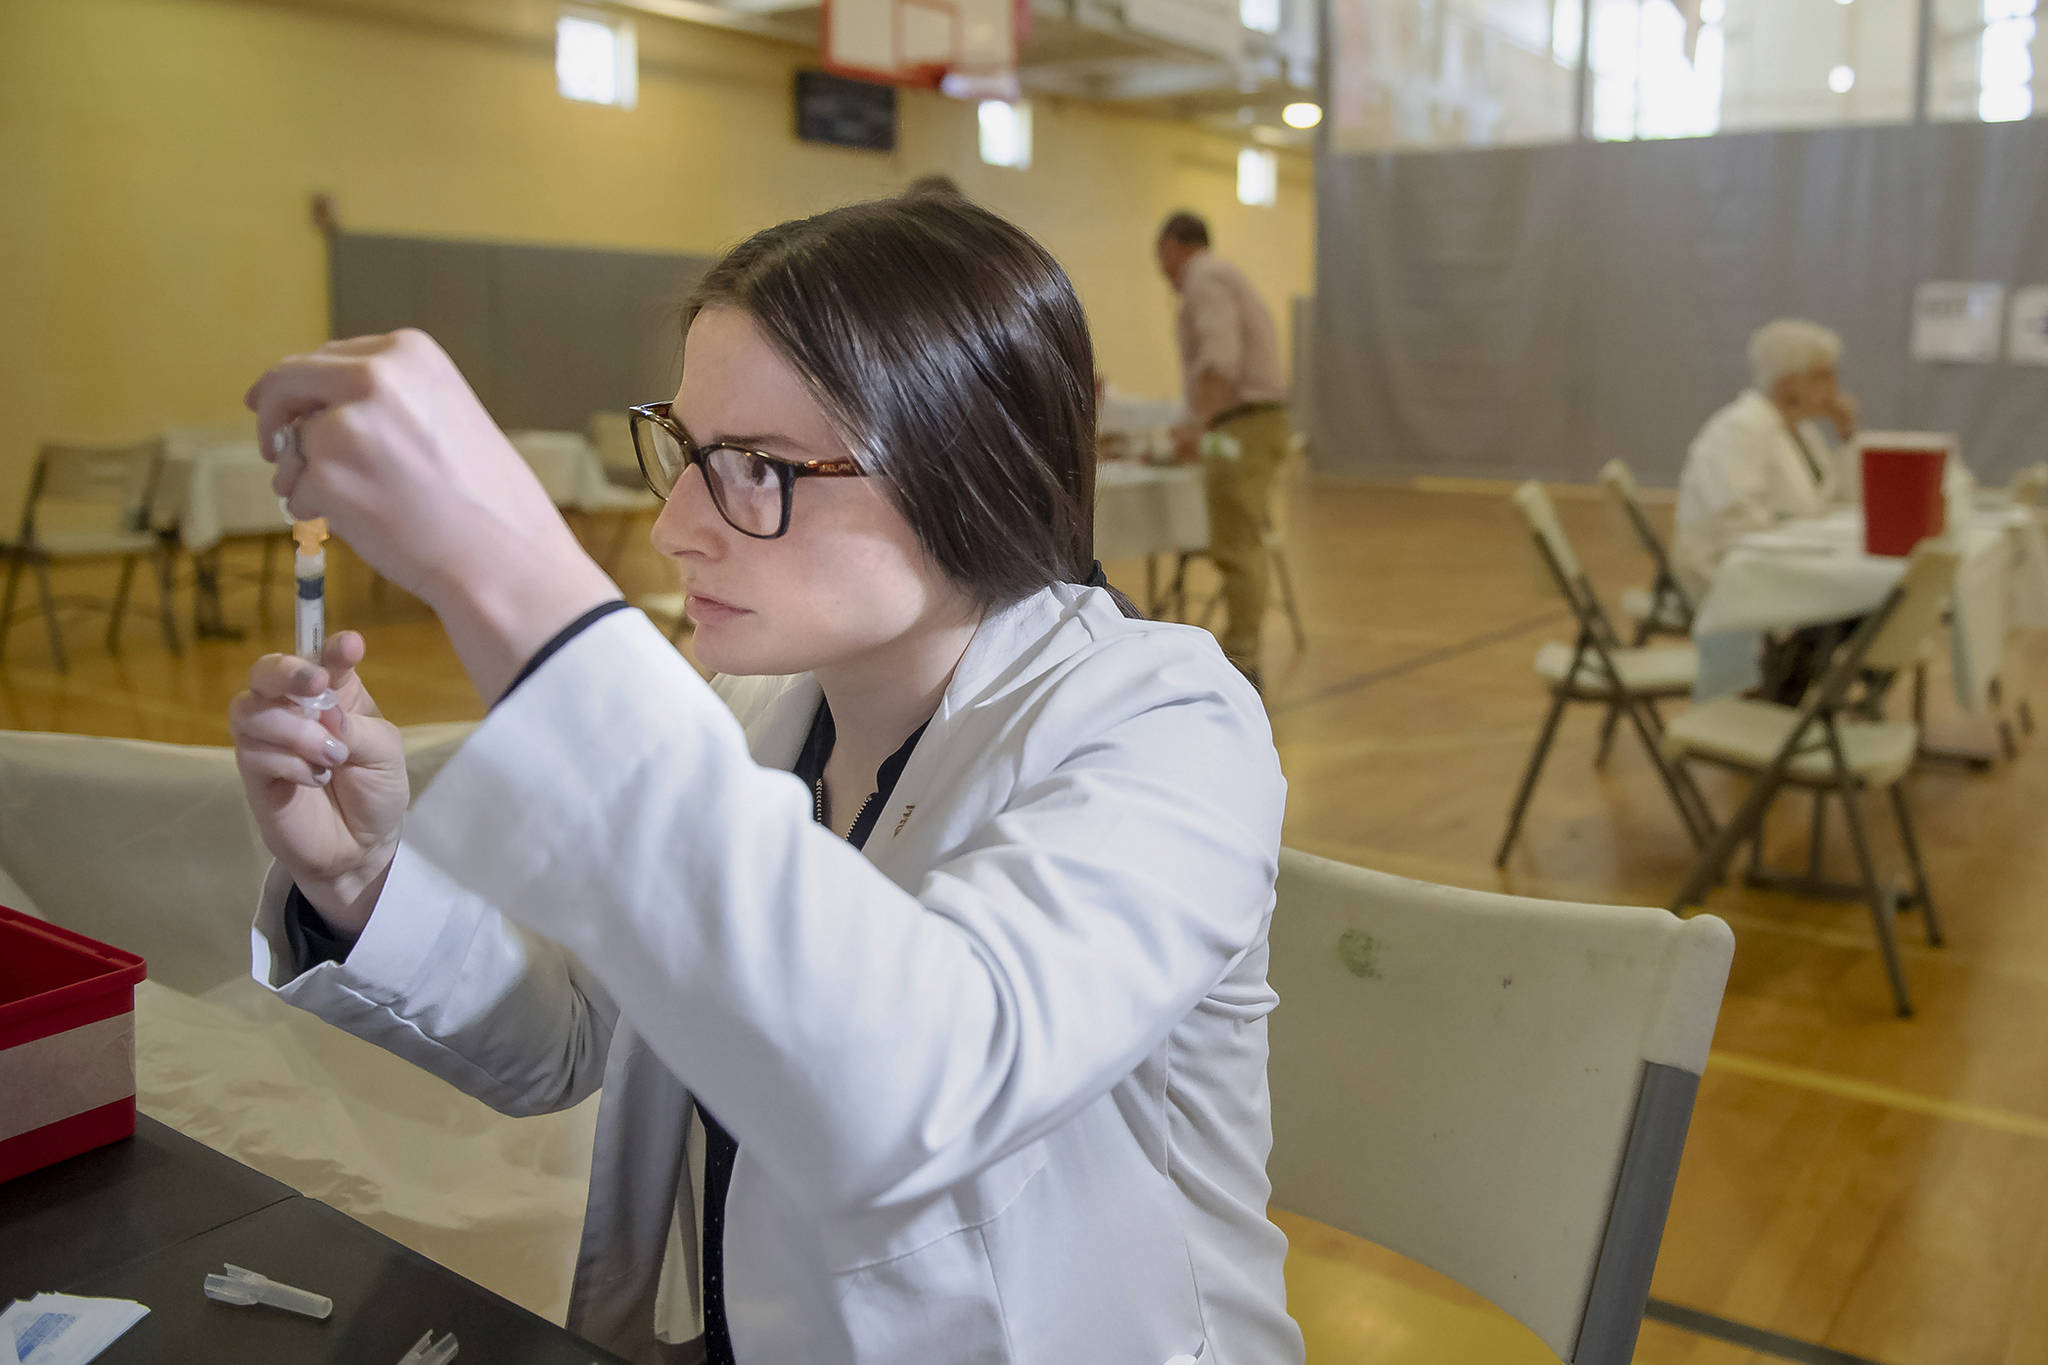 University of Pittsburgh pharmacy student Alexandria Taylor prepares syringes during a free measles vaccination clinic by the Allegheny County Health Department at the Homewood-Brushton YMCA on May 8, 2019 in Pittsburgh. (Steph Chambers | Pittsburgh Post-Gazette)